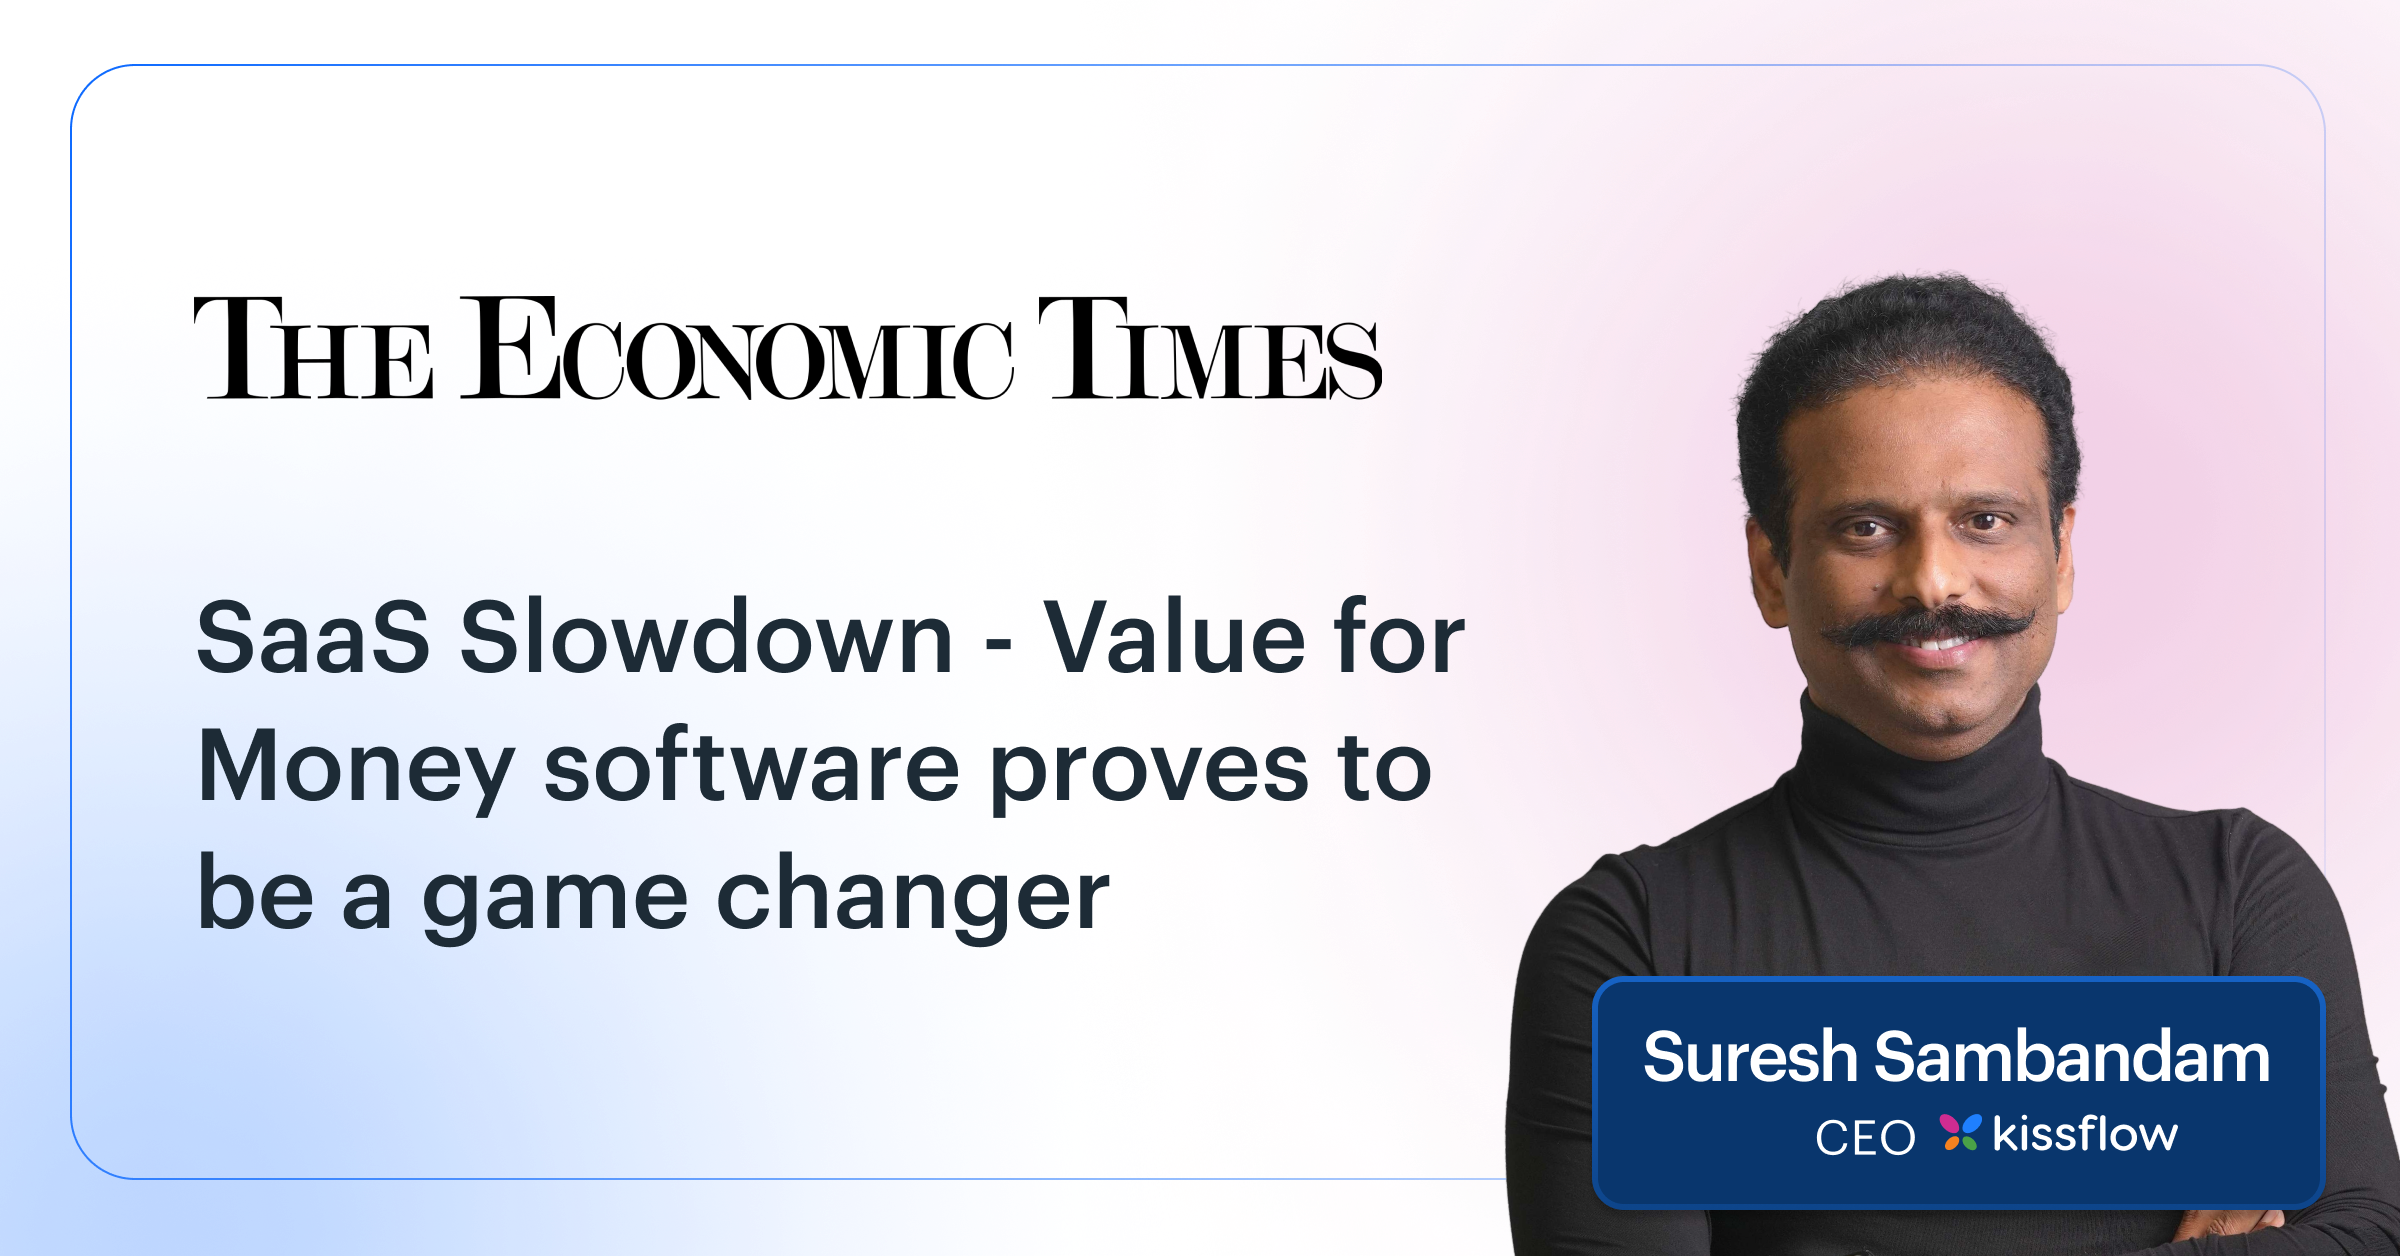 Suresh's quote on Slowdown cloud: Value-for-money software is silver lining for India SaaS